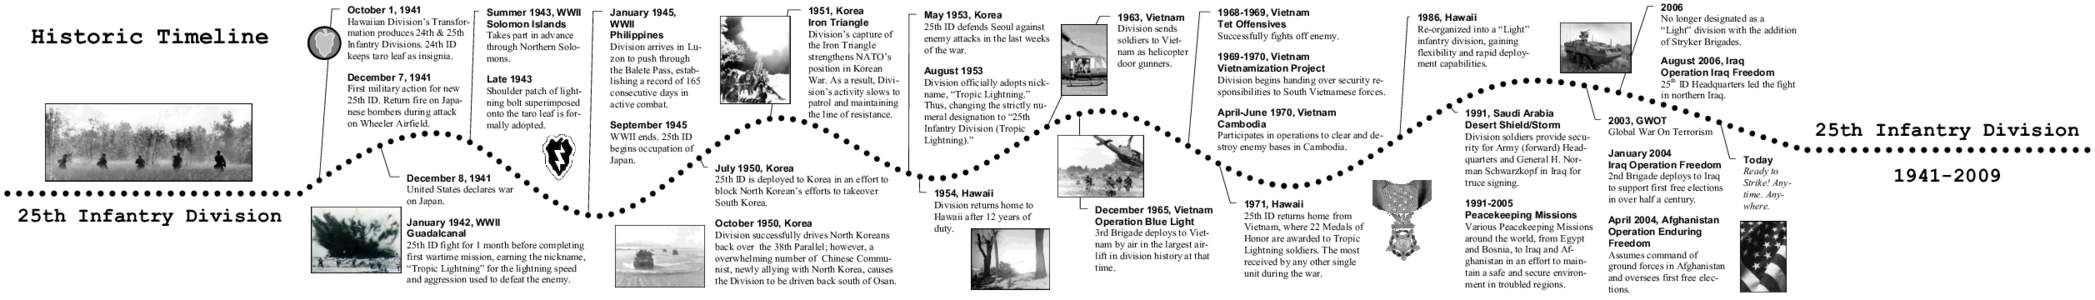 Historic Timeline  October 1, 1941 Hawaiian Division’s Transformation produces 24th & 25th Infantry Divisions. 24th ID keeps taro leaf as insignia.